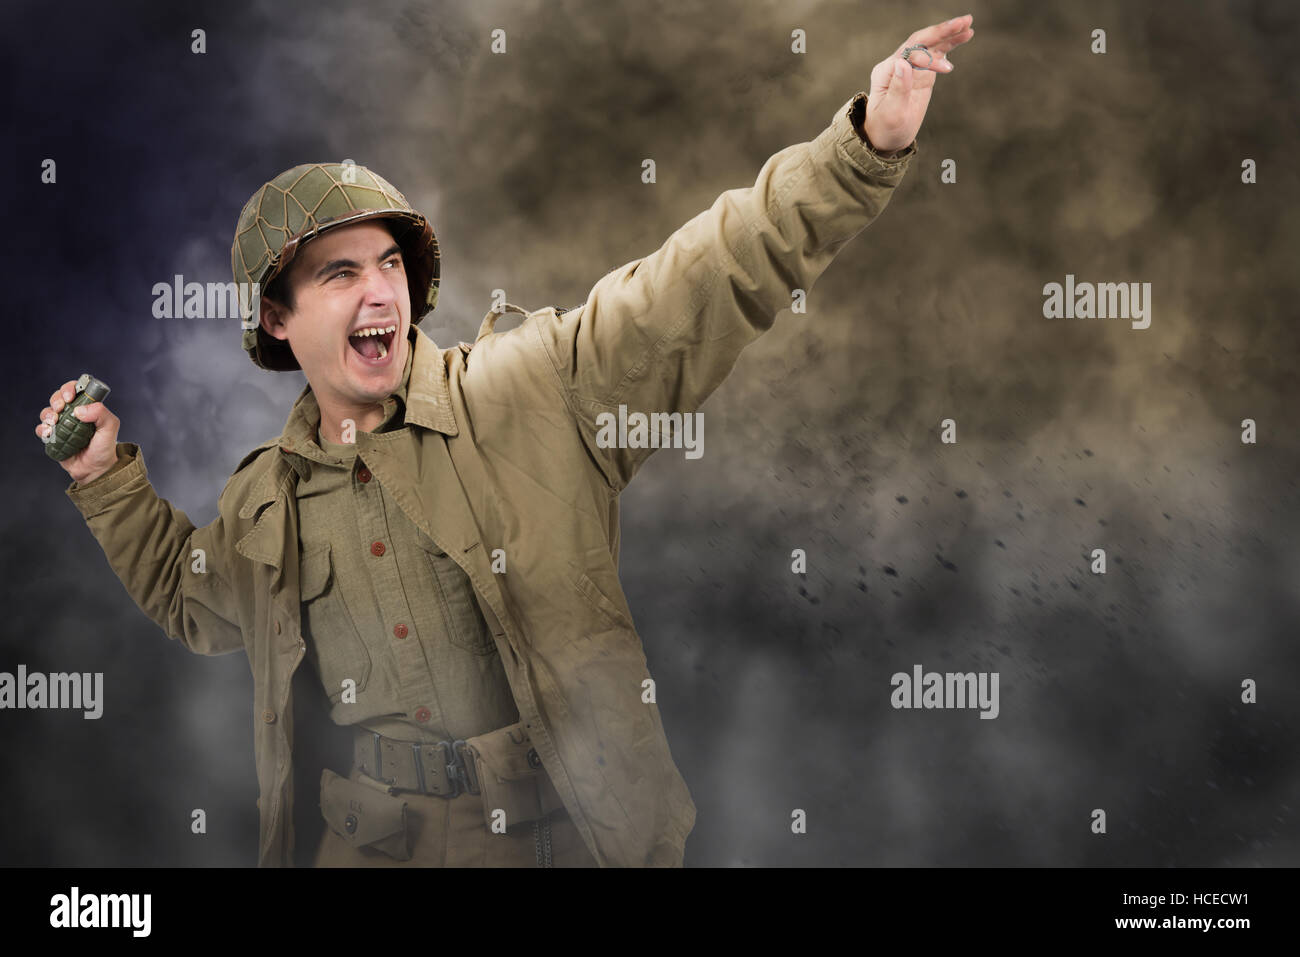 young American soldier ww2 throwing a grenade Stock Photo